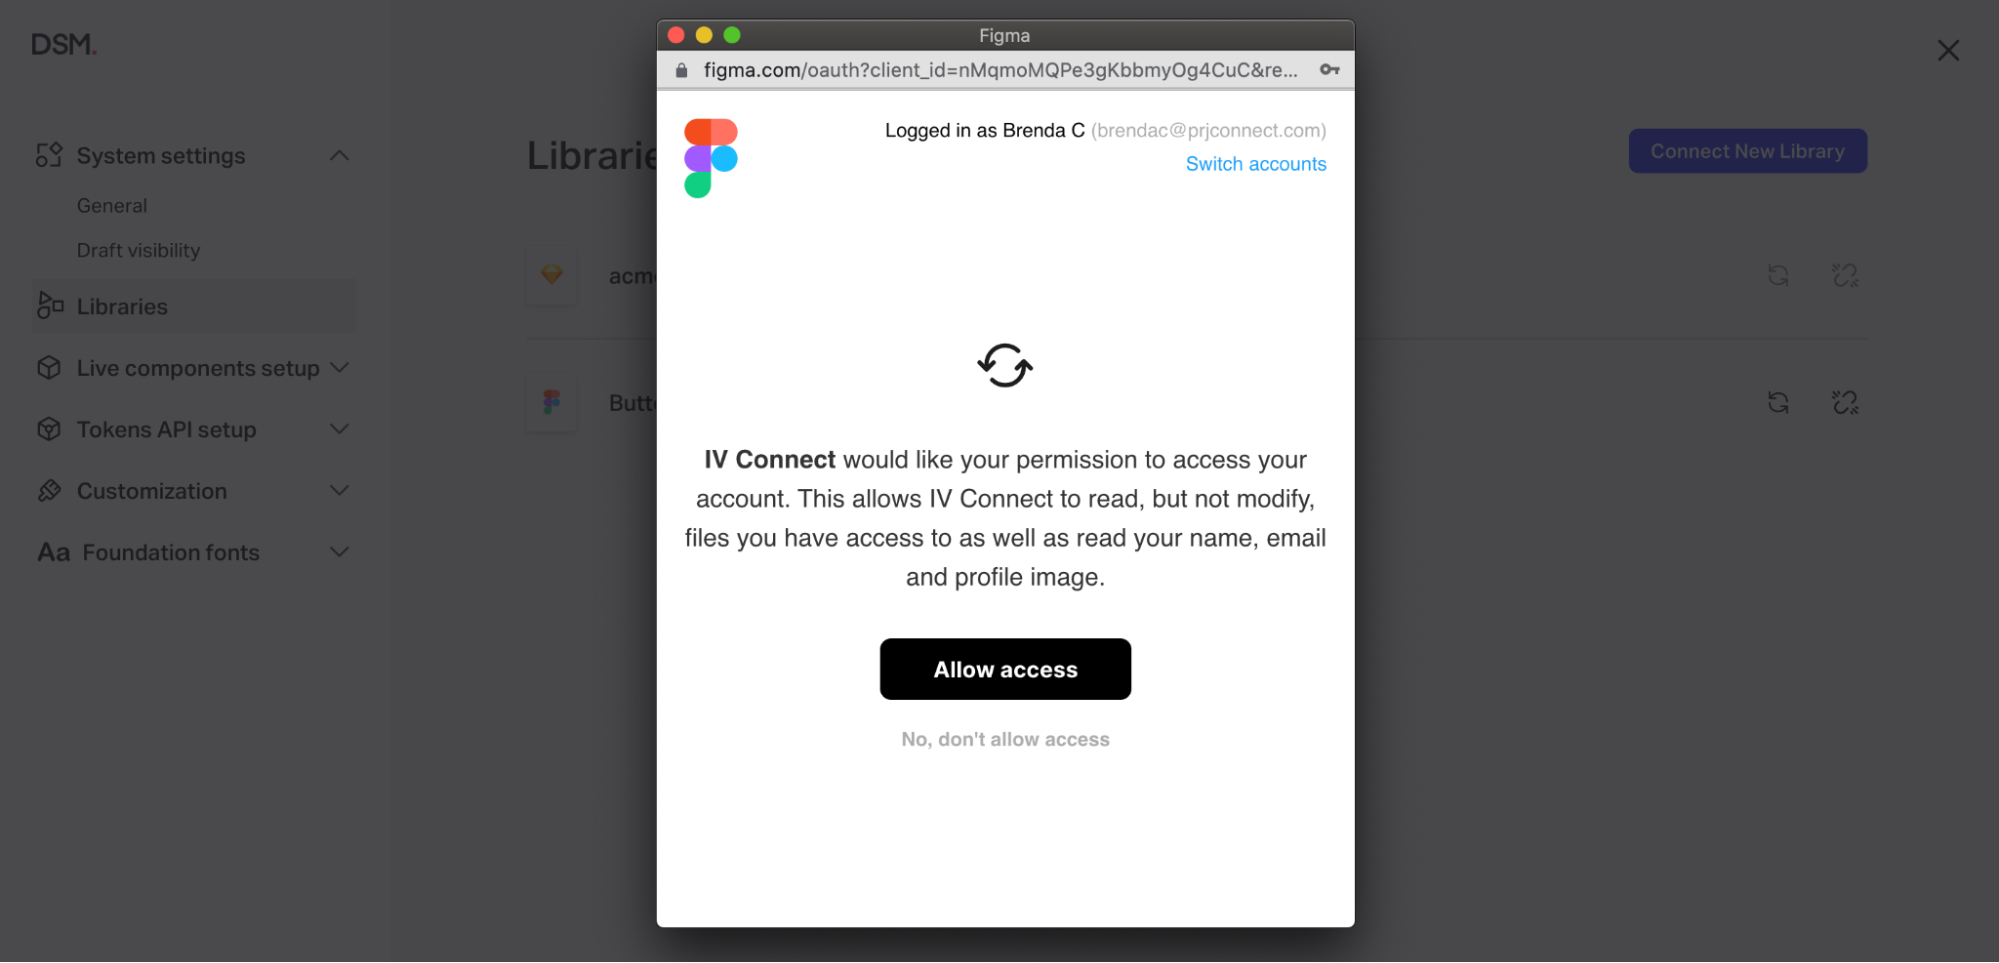 invision-dsm-allow-figma-access.png